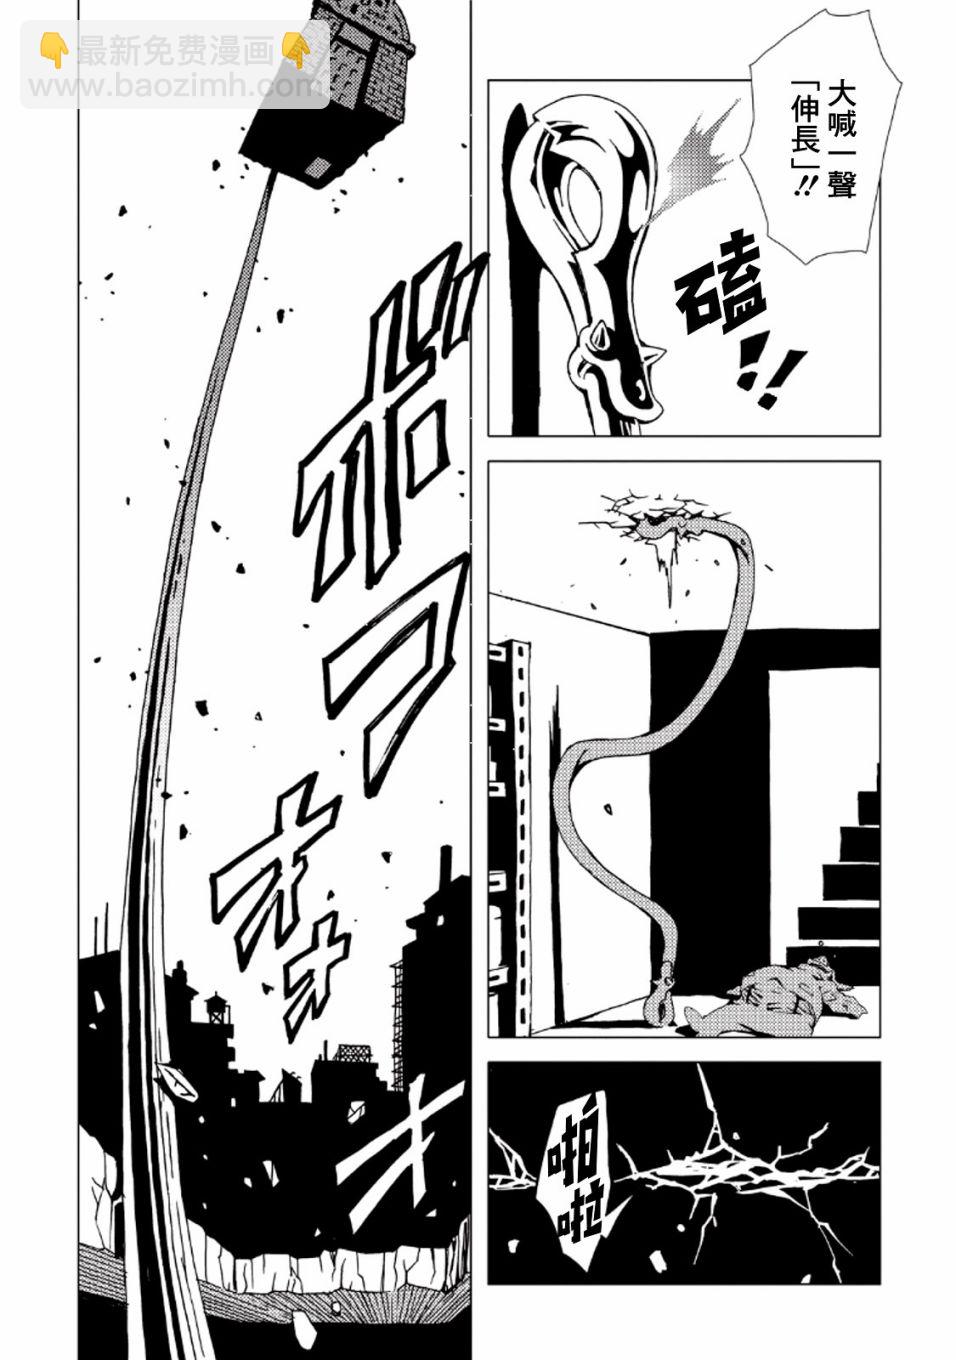 AREA51 - 第34话 - 1